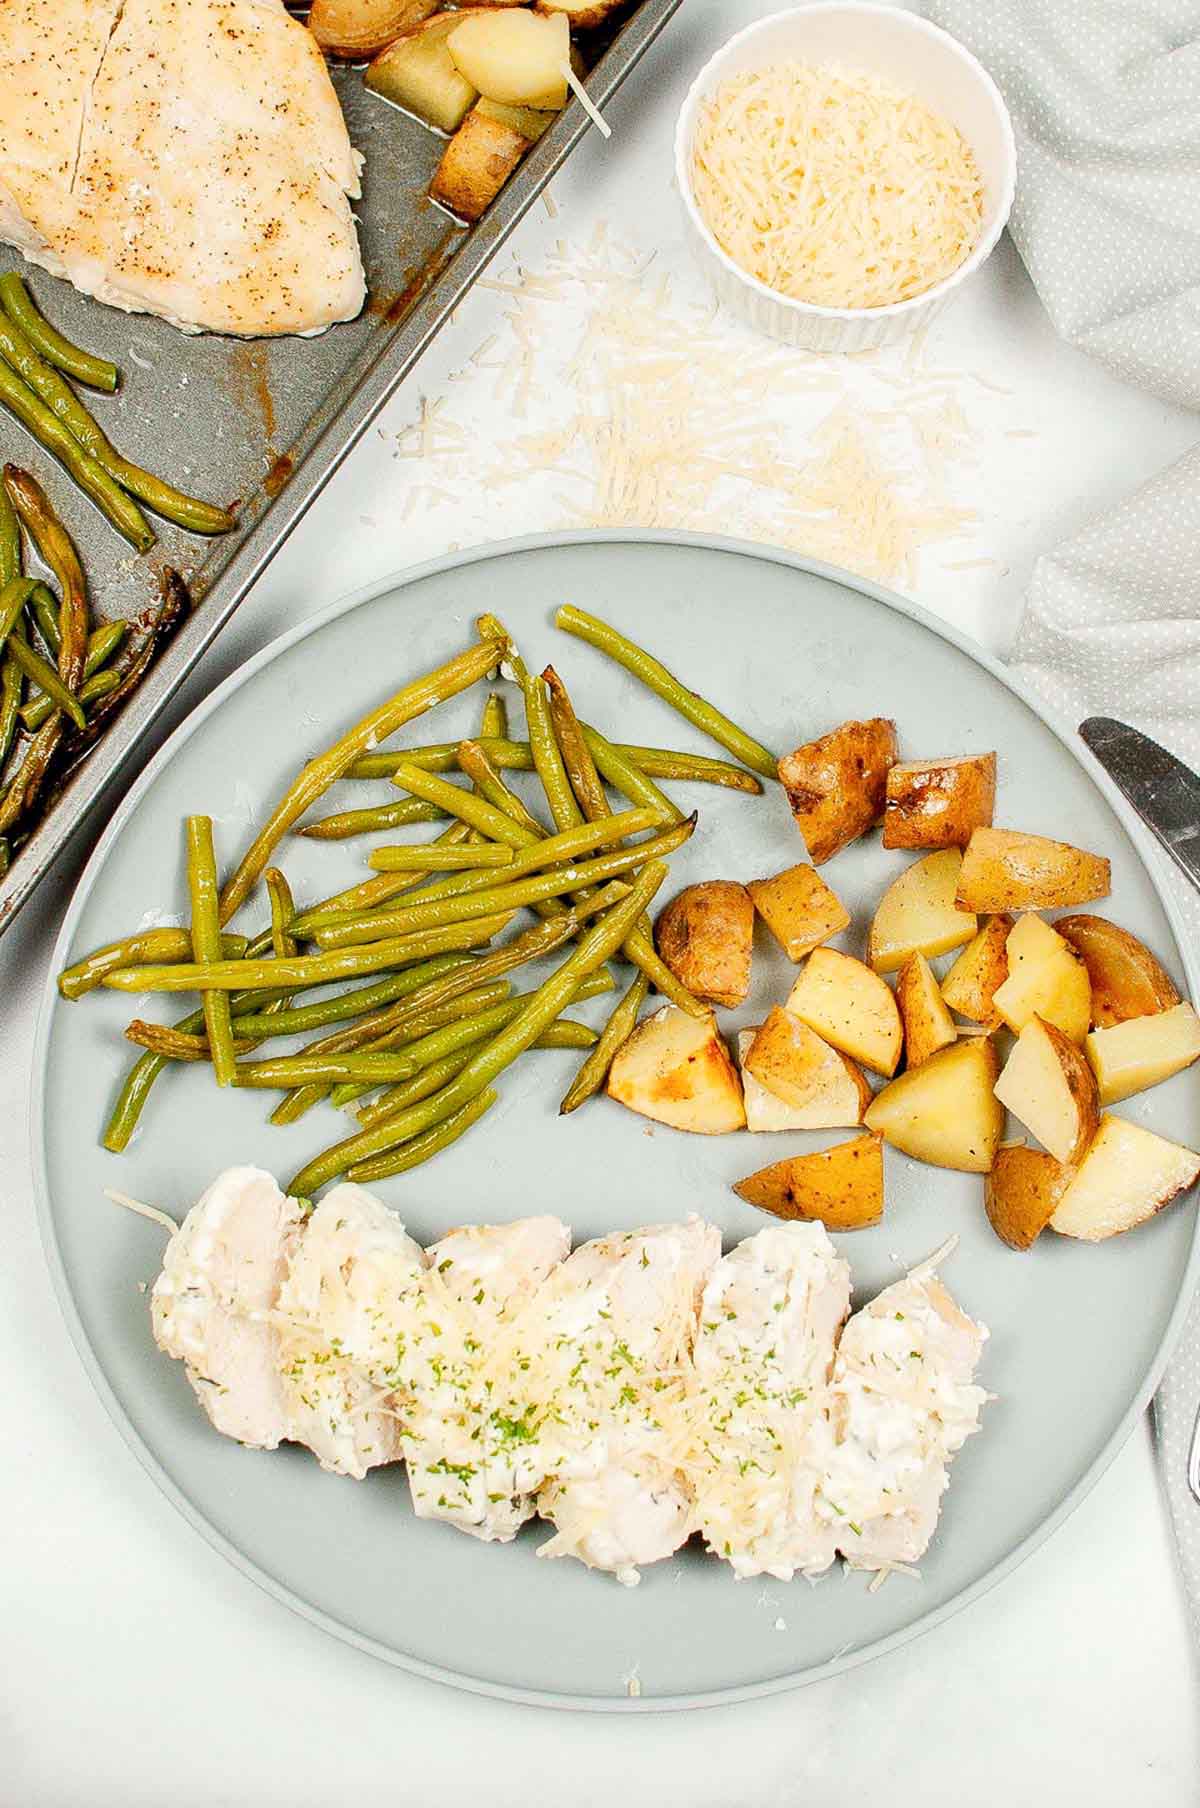 top view of chicken, potatoes and green beans on a plate.